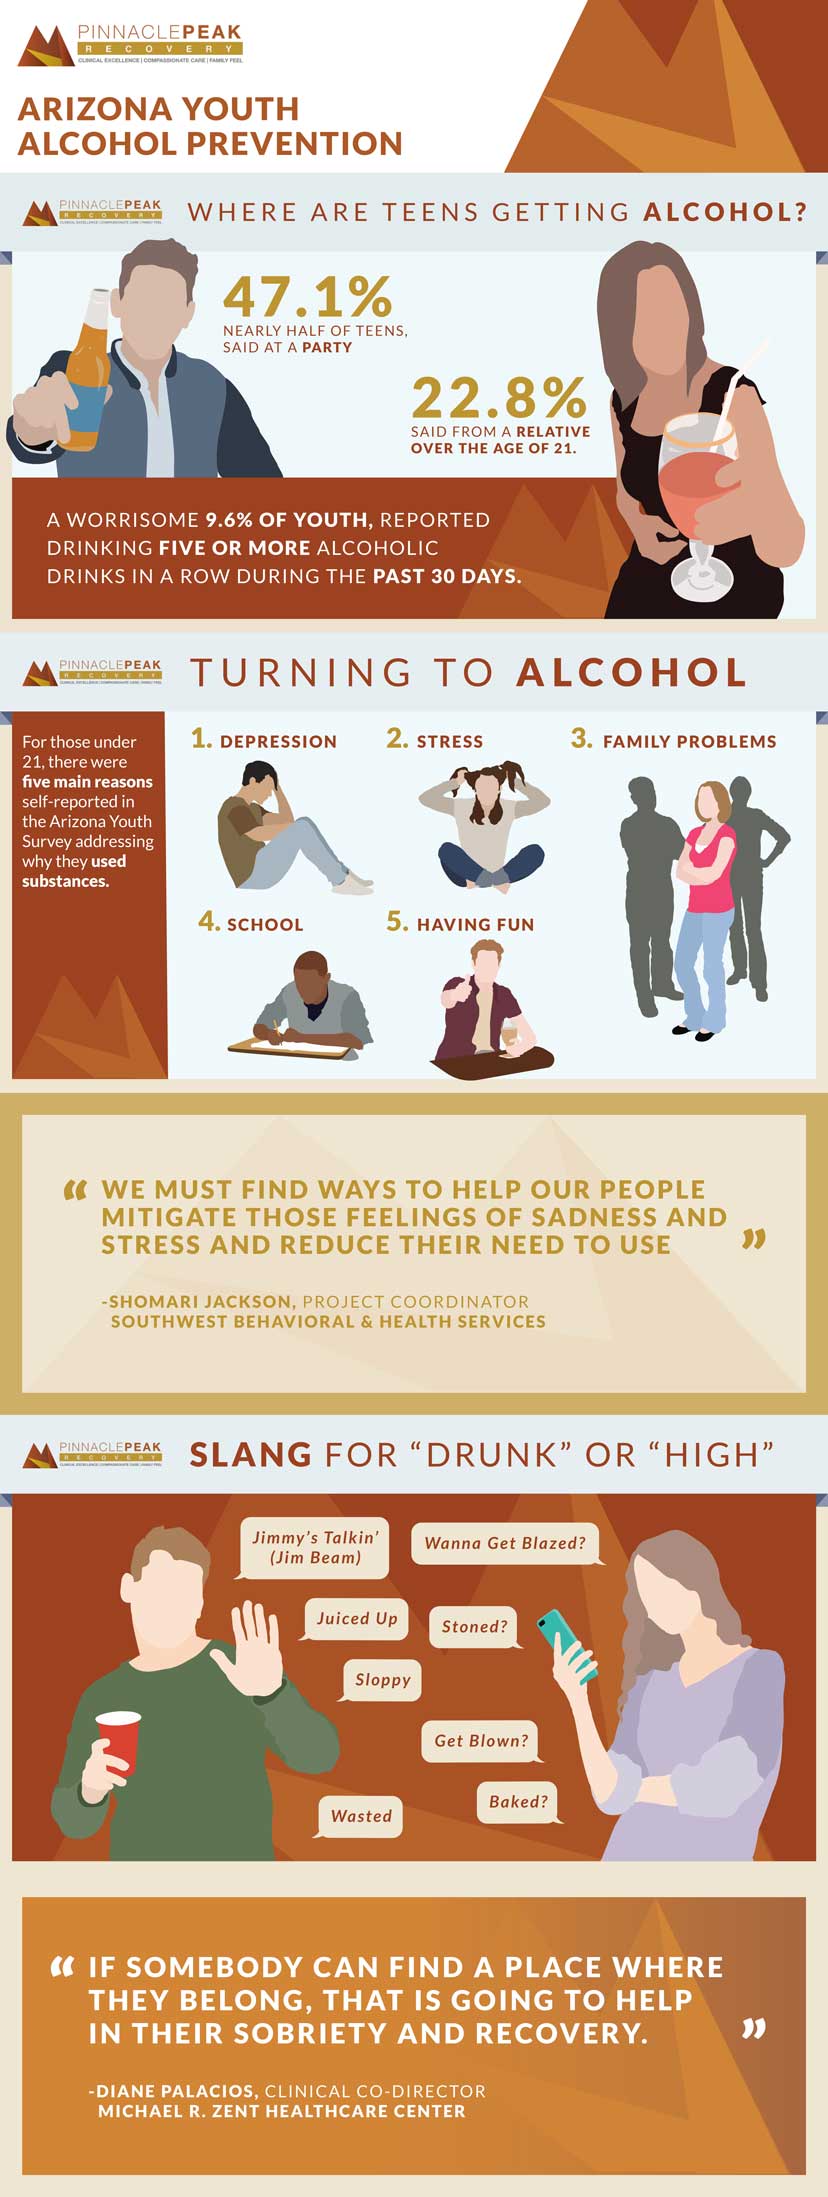 Arizona Youth Alcohol Prevention Infographic